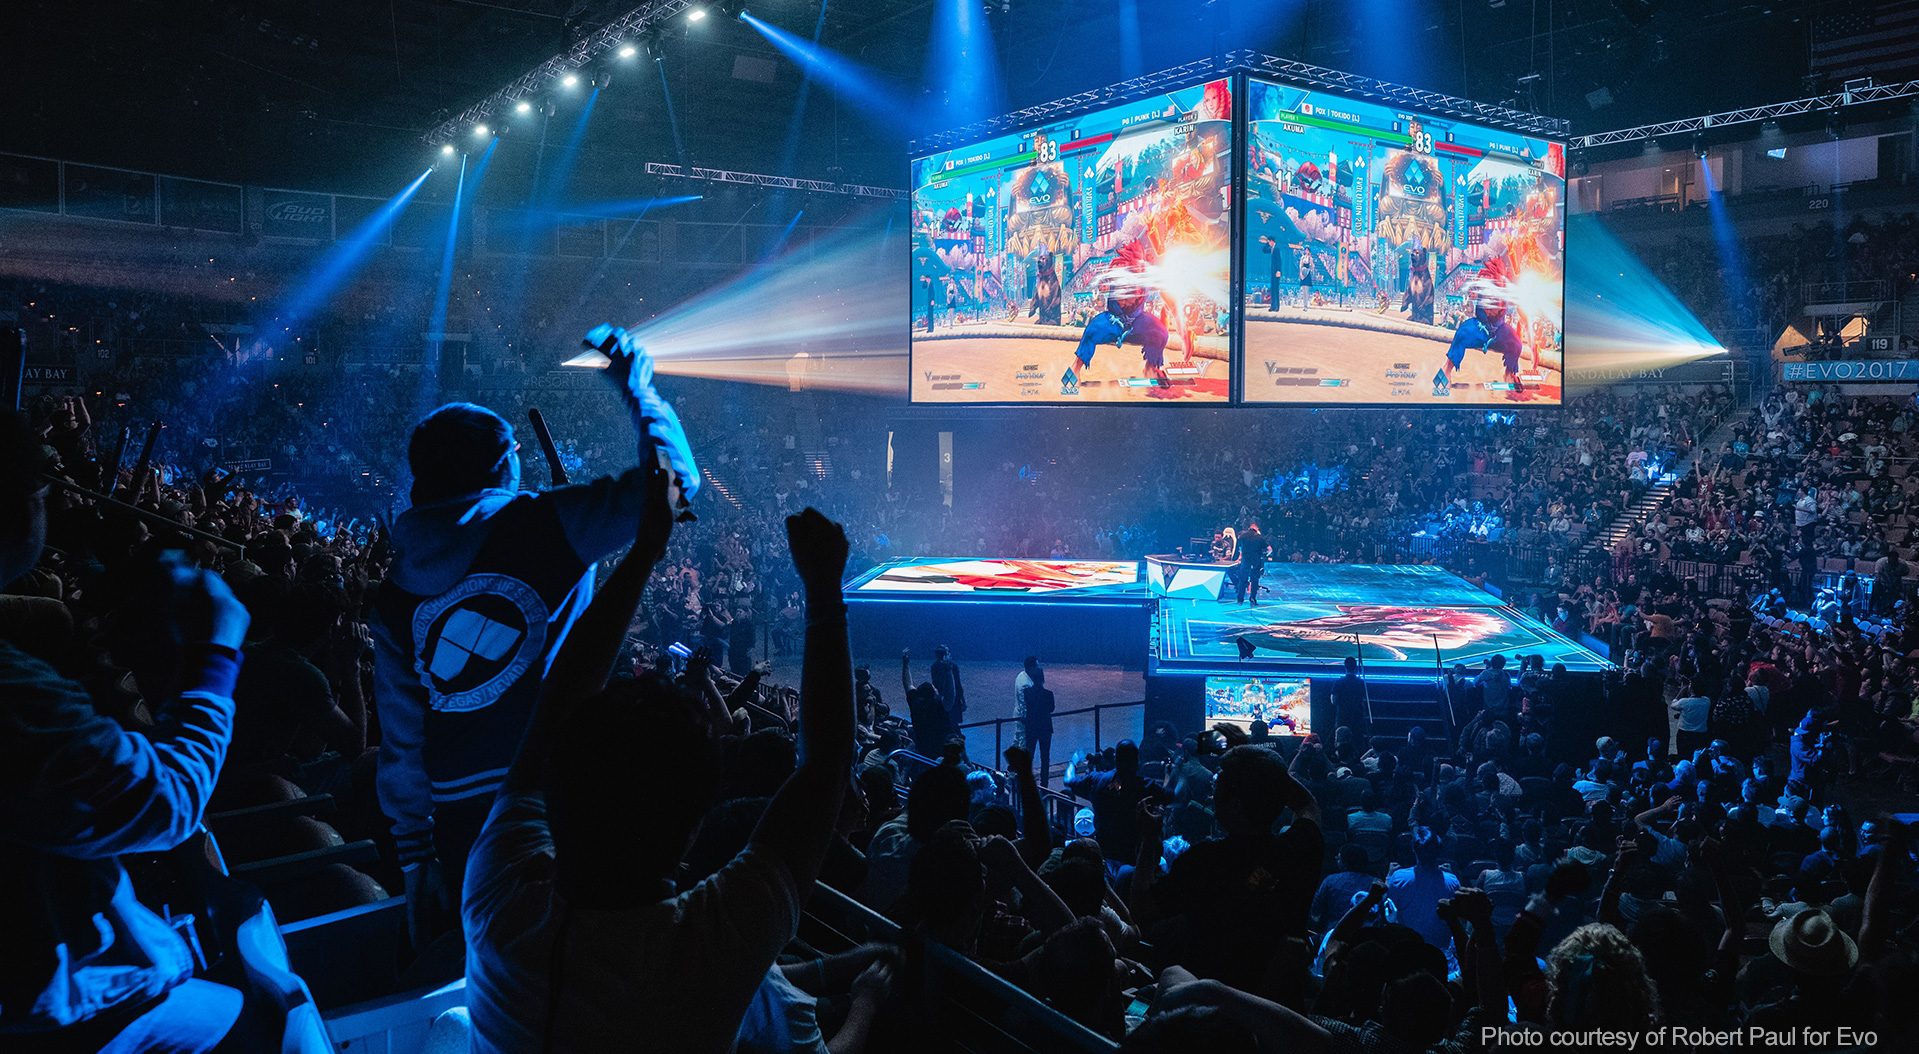 All the Fighting Game News Announced at Evo 2023